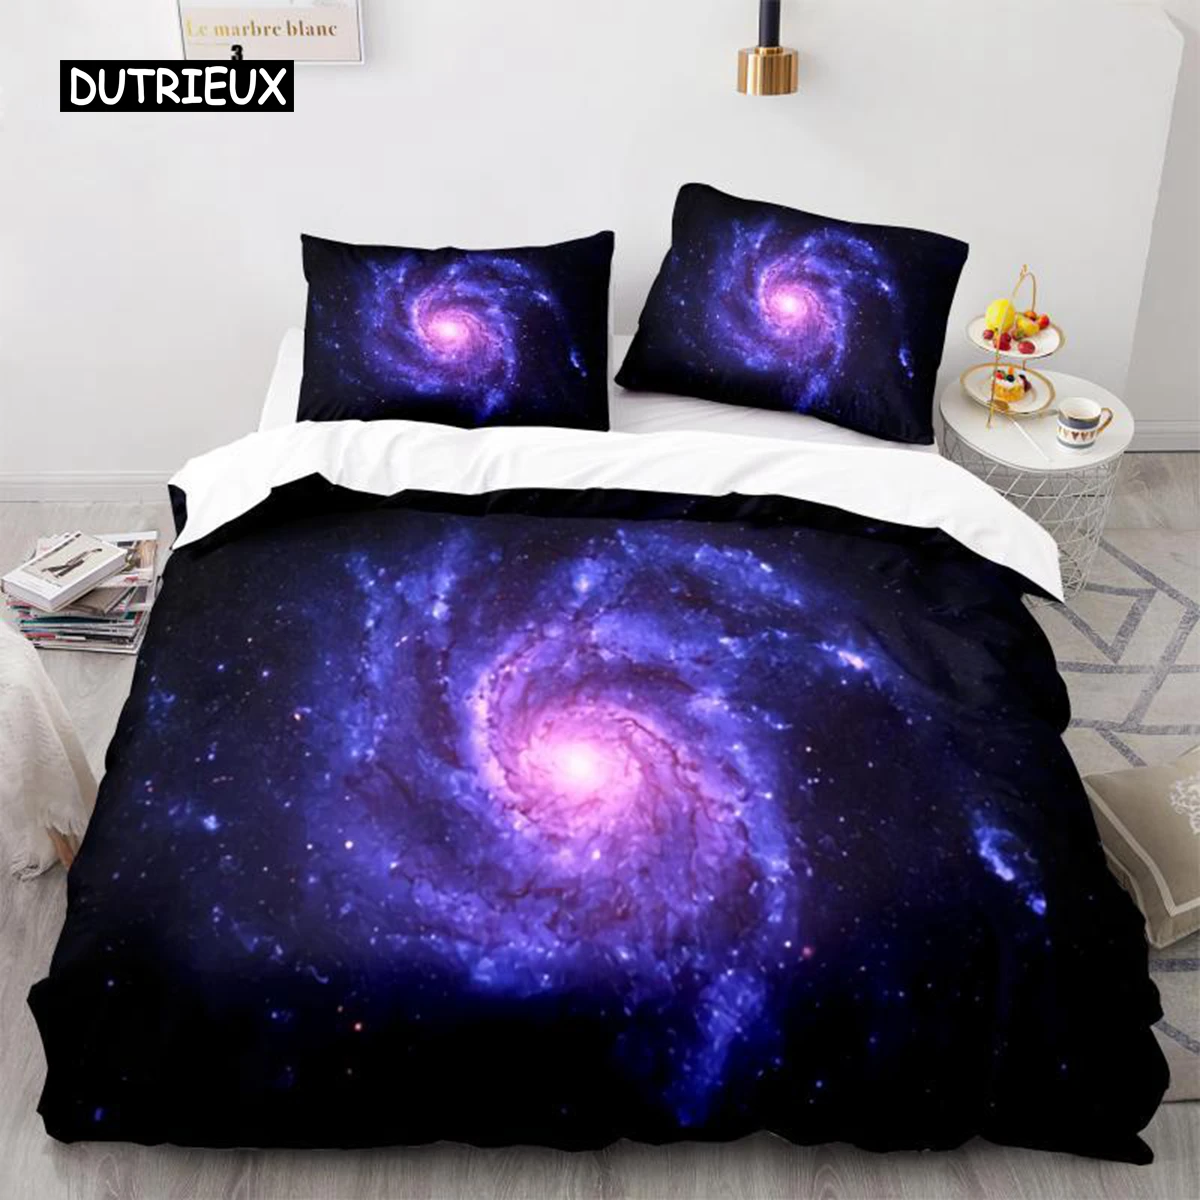 

Starry Sky Duvet Cover Twin Size Universe Decor Twin Bedding Set Microfiber Outer Space Theme Milky Way Galaxy Comforter Cover